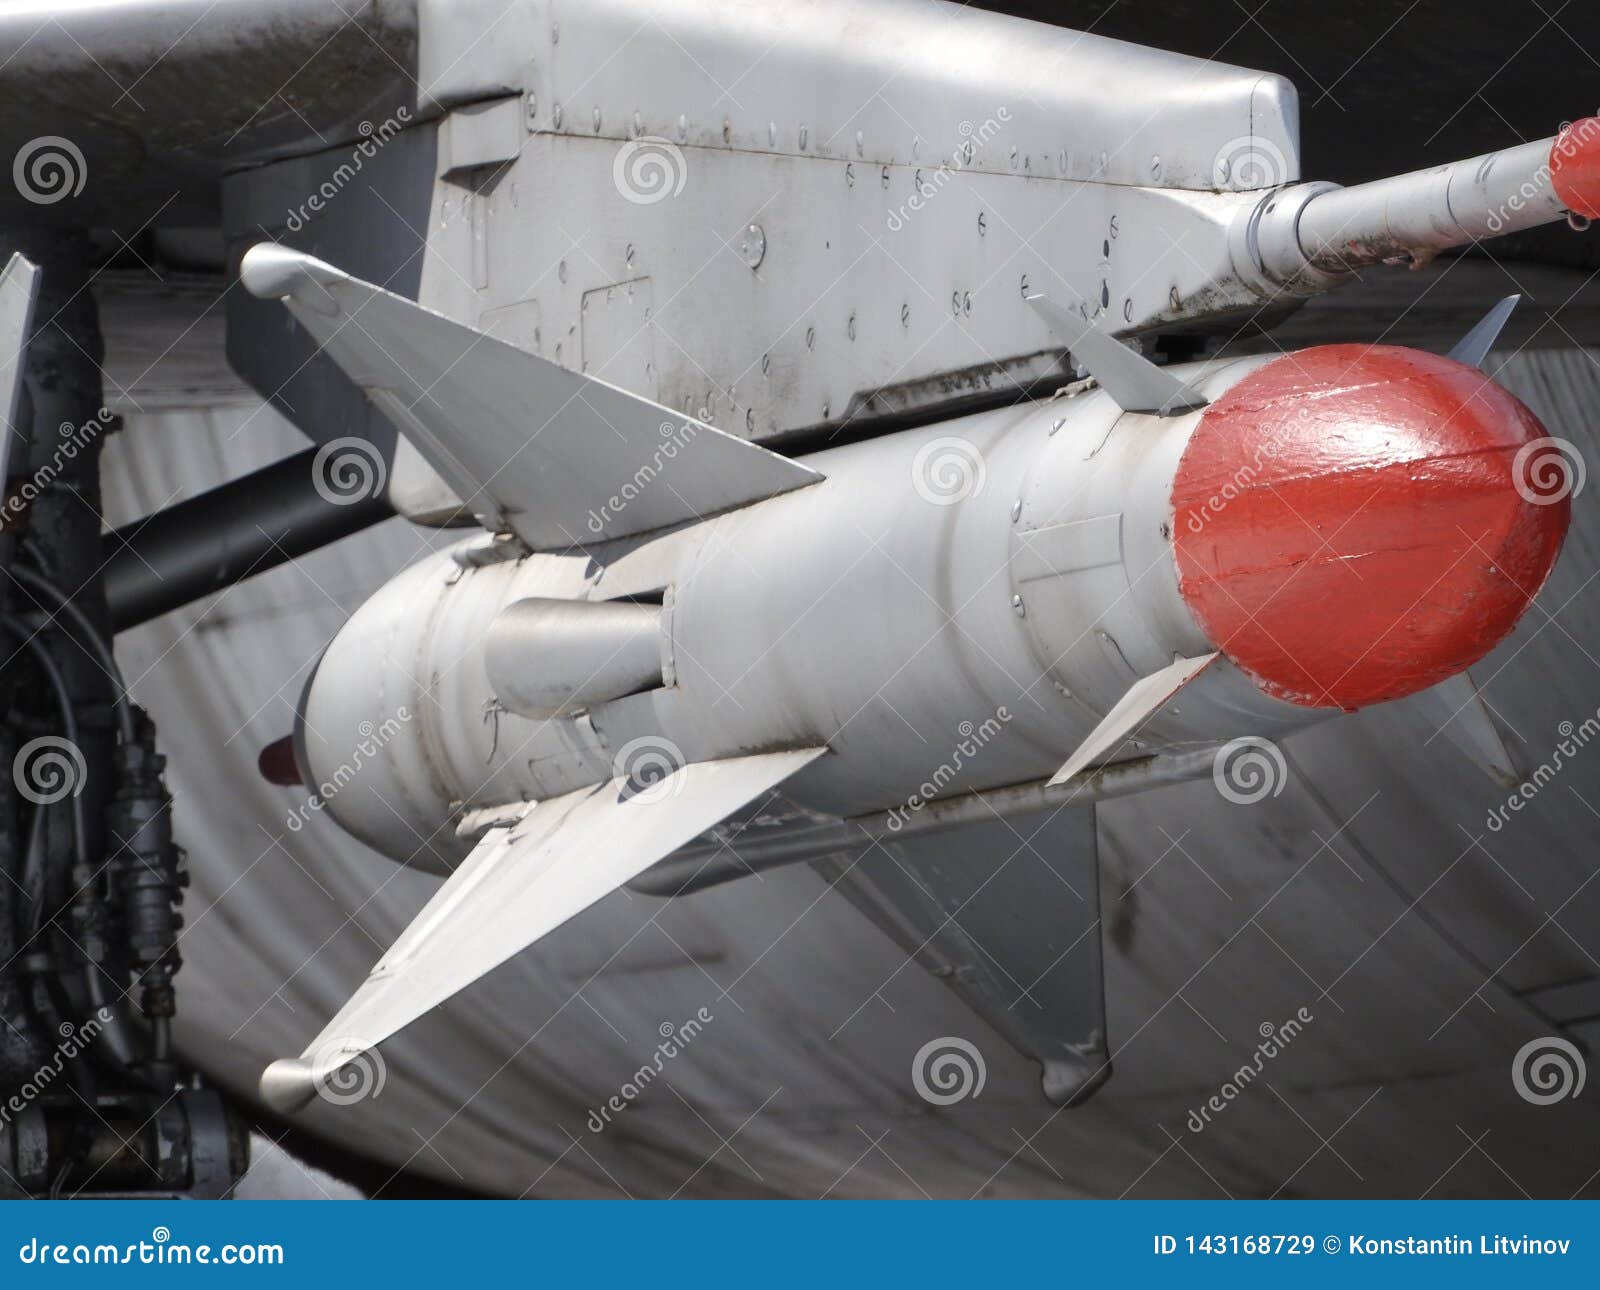 suspended armament of the aircraft. the space under the wing of a military aircraft. visible weapons. the plane is ready for